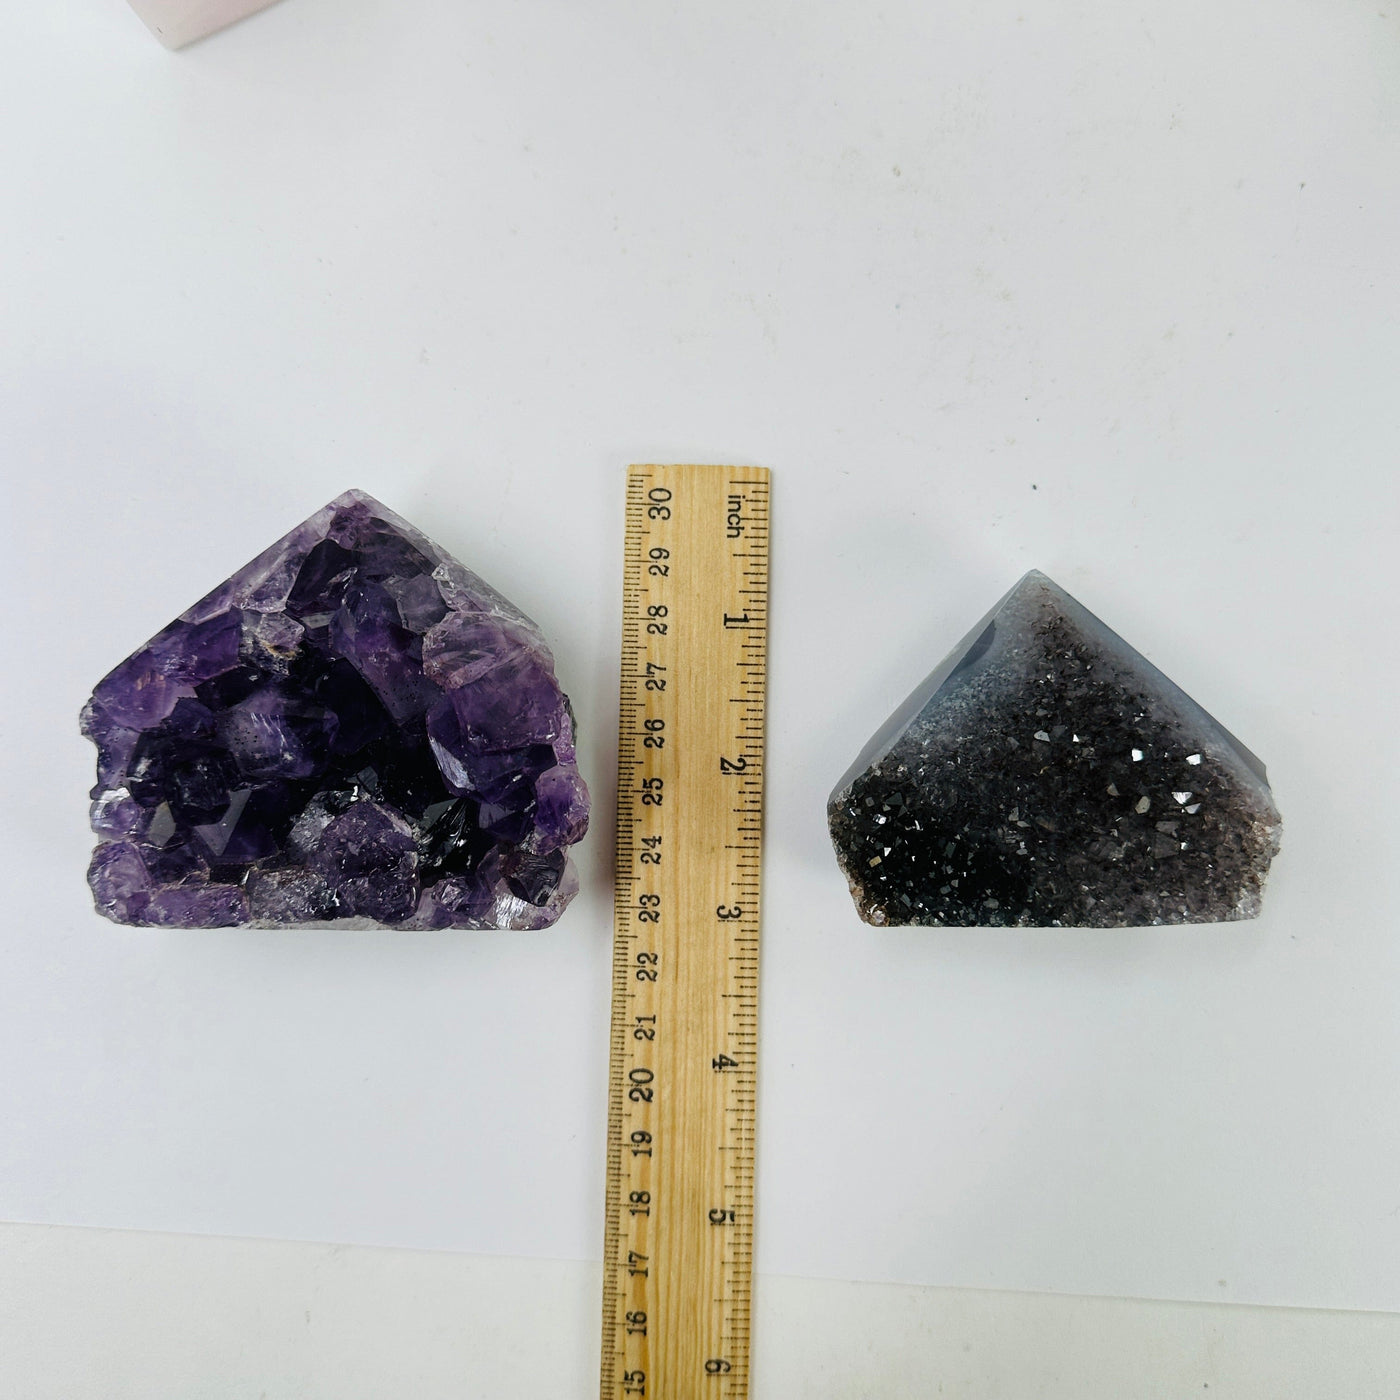 amethyst points next to a ruler for size reference